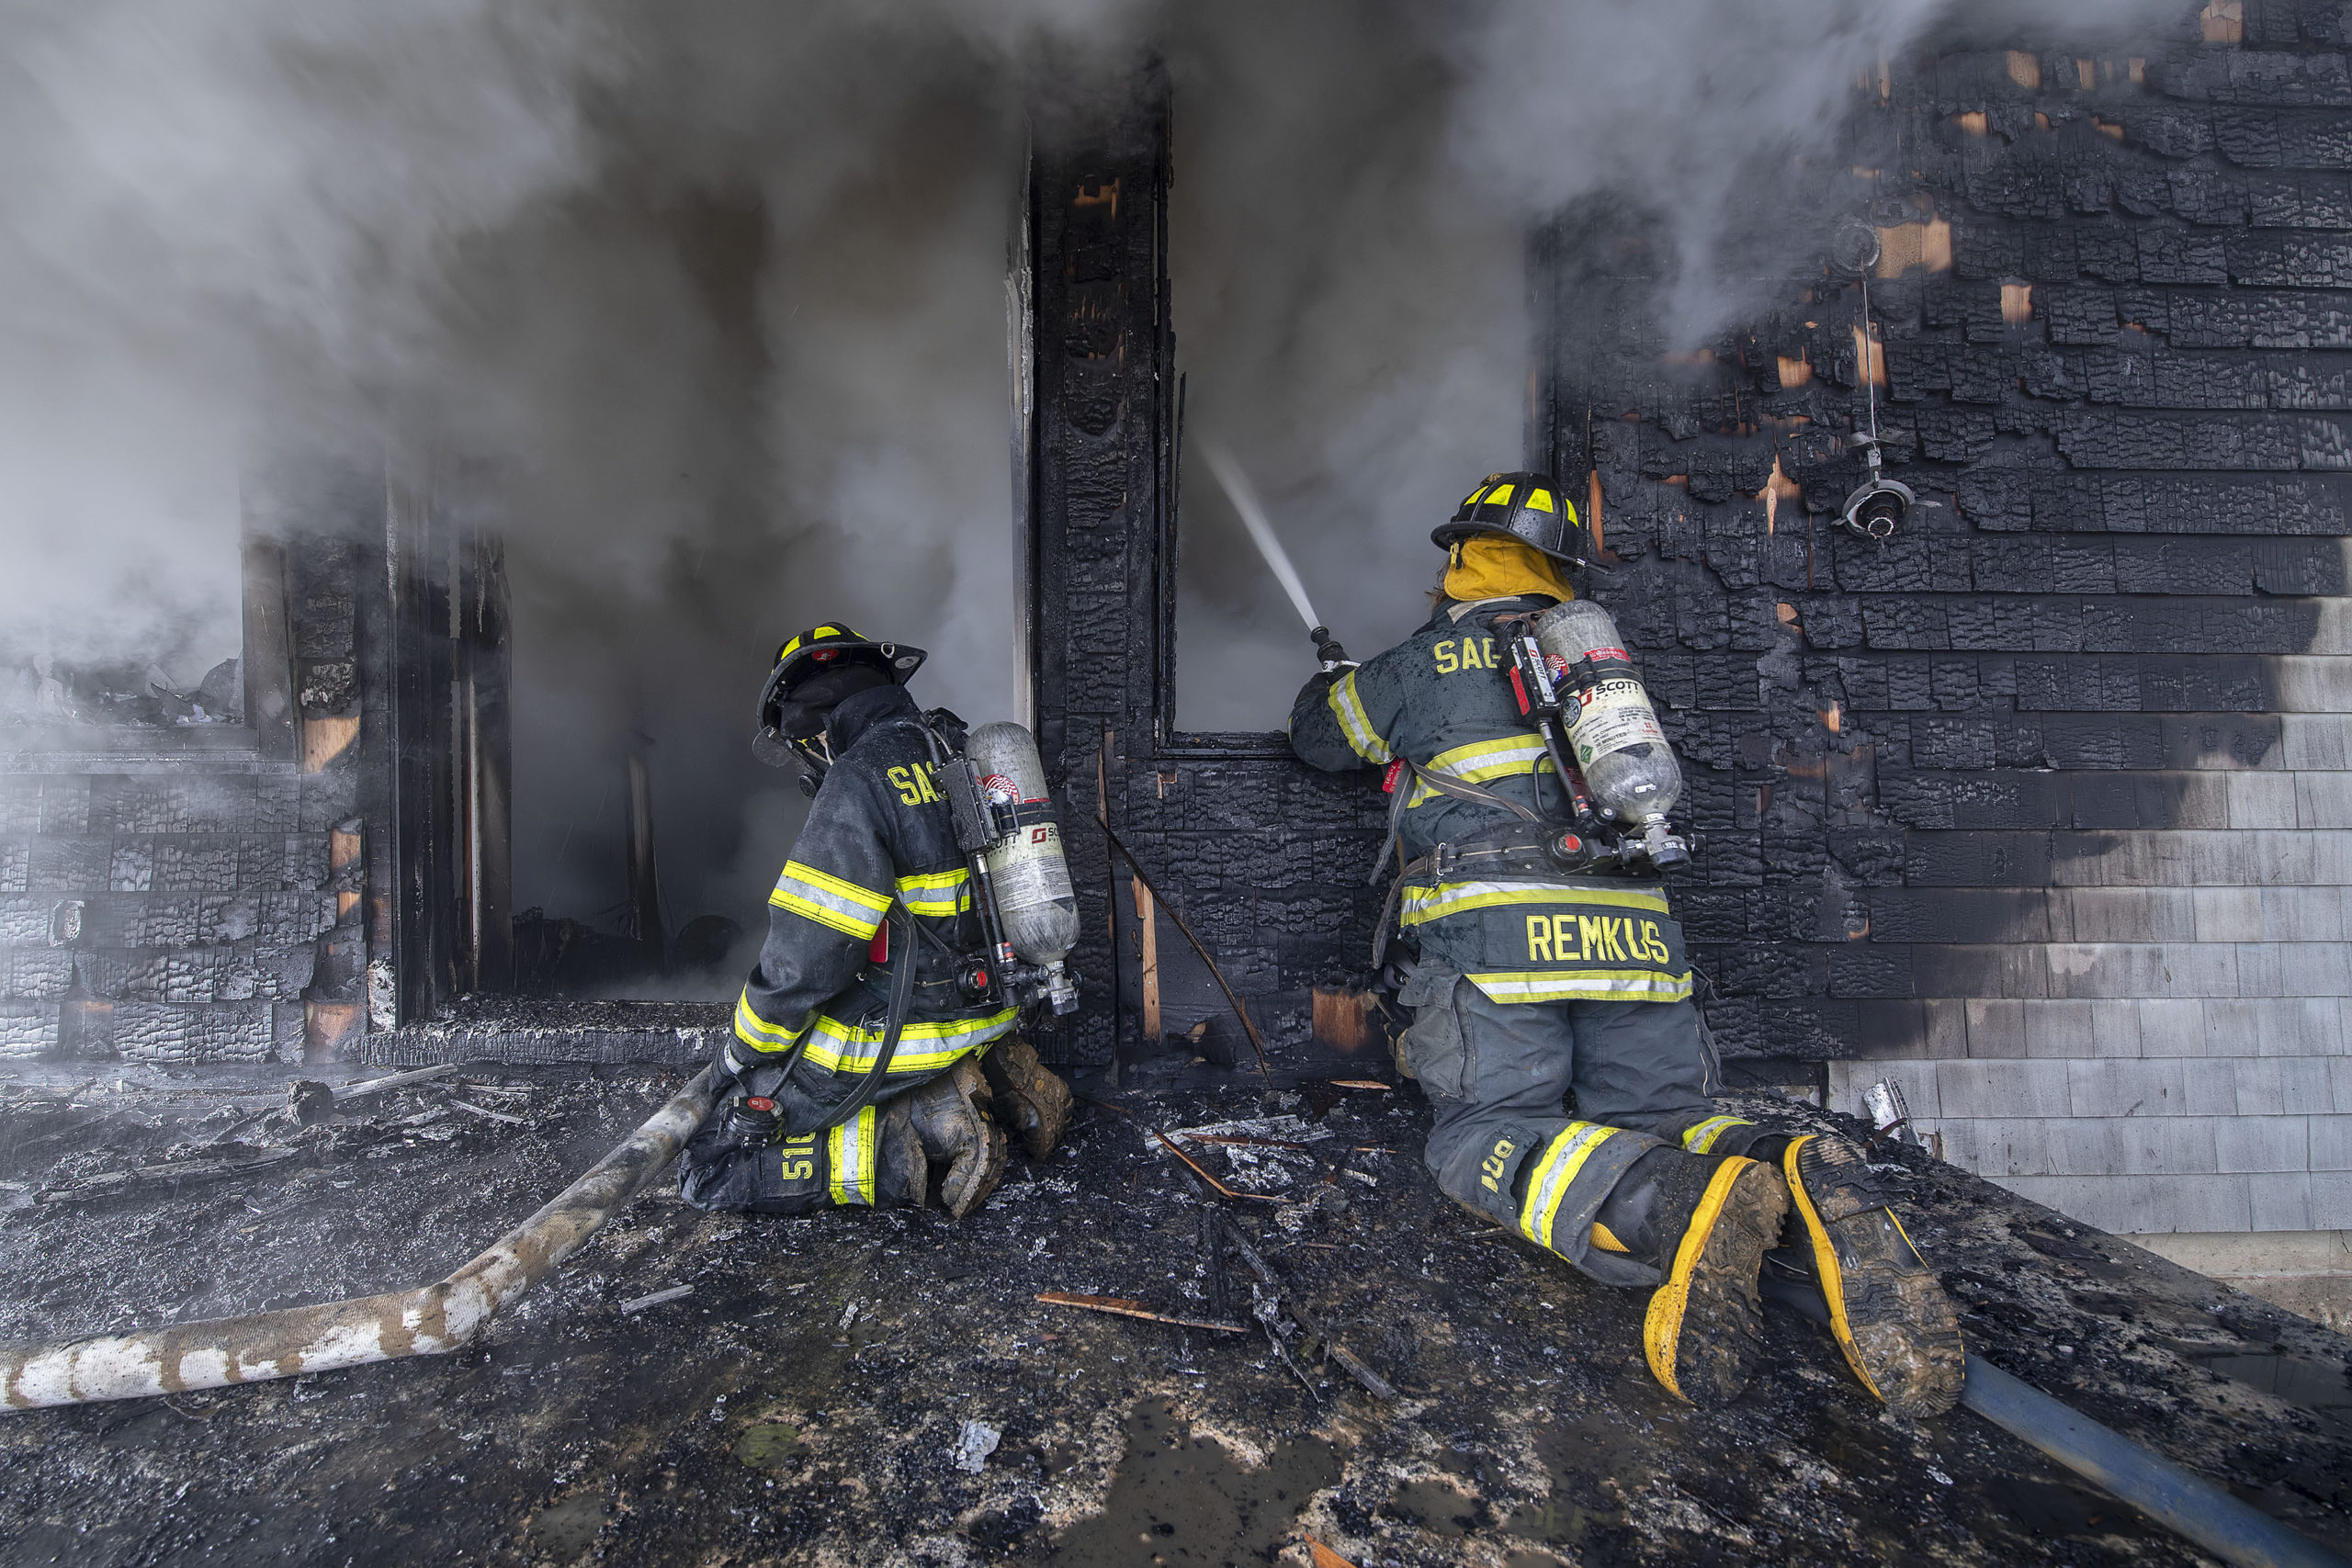 The Bridgehampton Fire Department, with mutual aid from numerous other departments and EMS agencies including the Southampton, Hampton Bays, North Sea, Sag Harbor, East Hampton and Springs Fire Departments, fought a difficult working fire in a 8,000 square-foot residence at9 West Pond Drive in Water Mill on Thursday.     MICHAEL HELLER